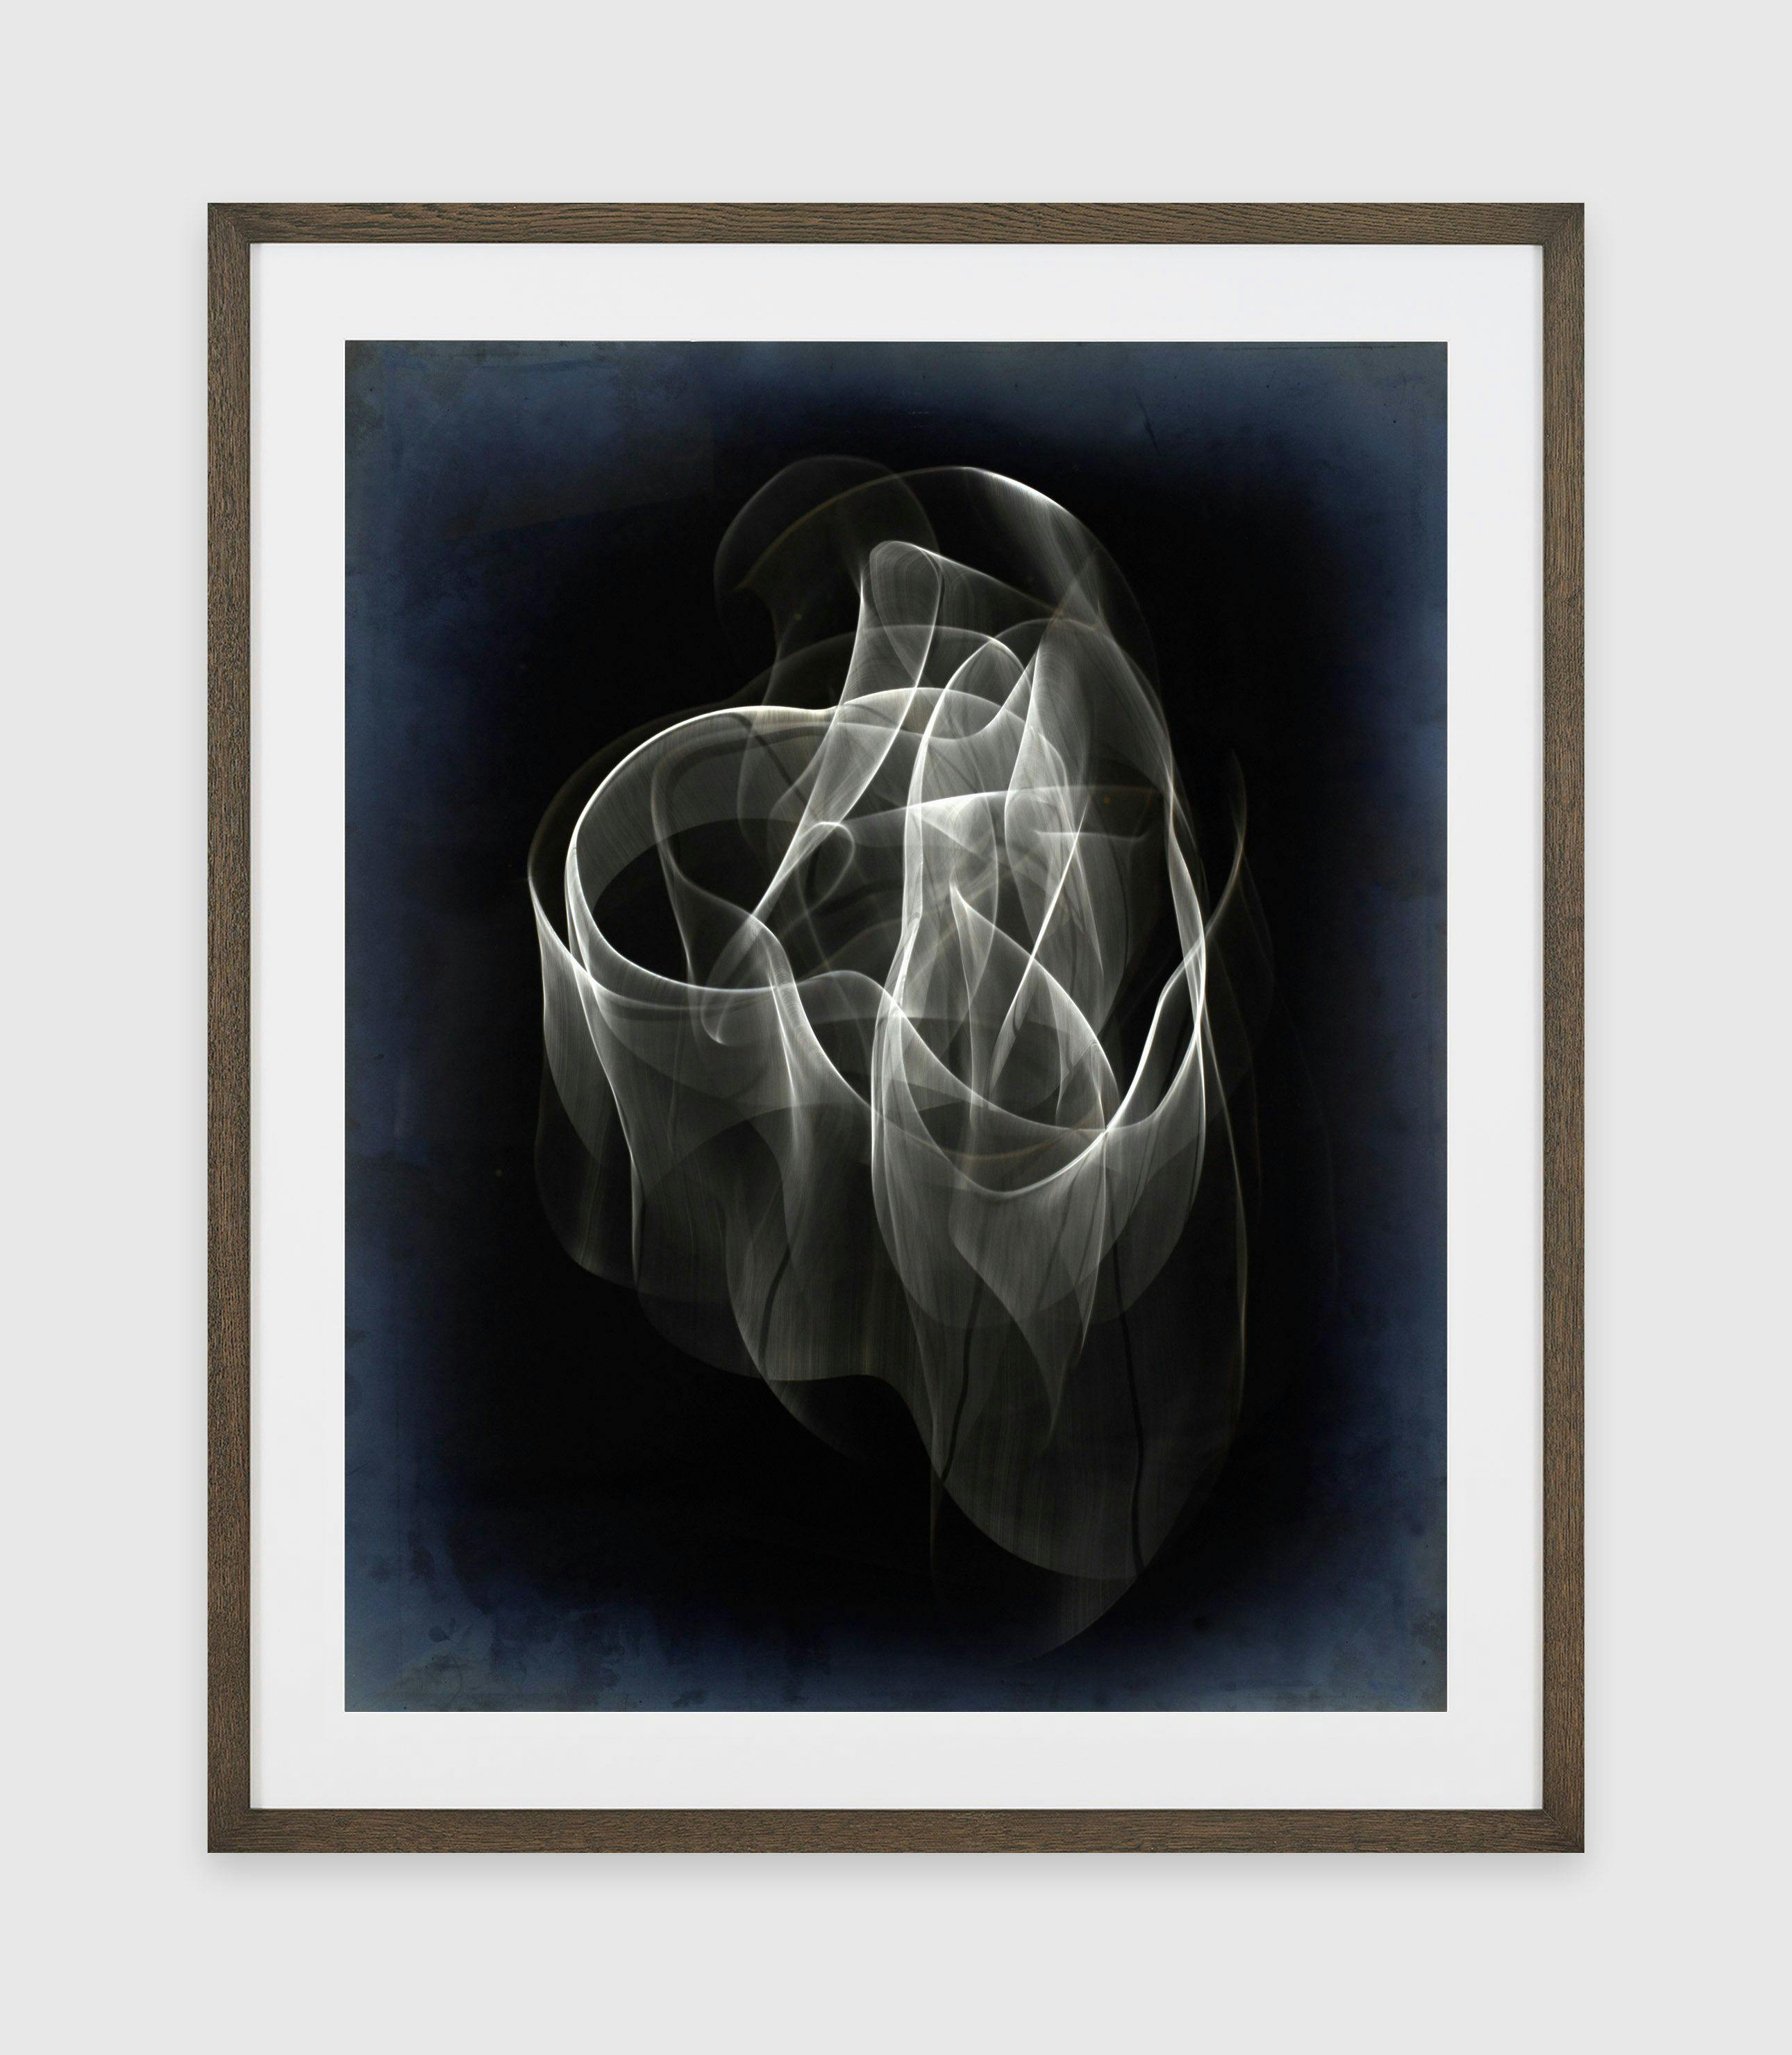 A photograph by Thomas Ruff, called untitled#15, dated 2022.